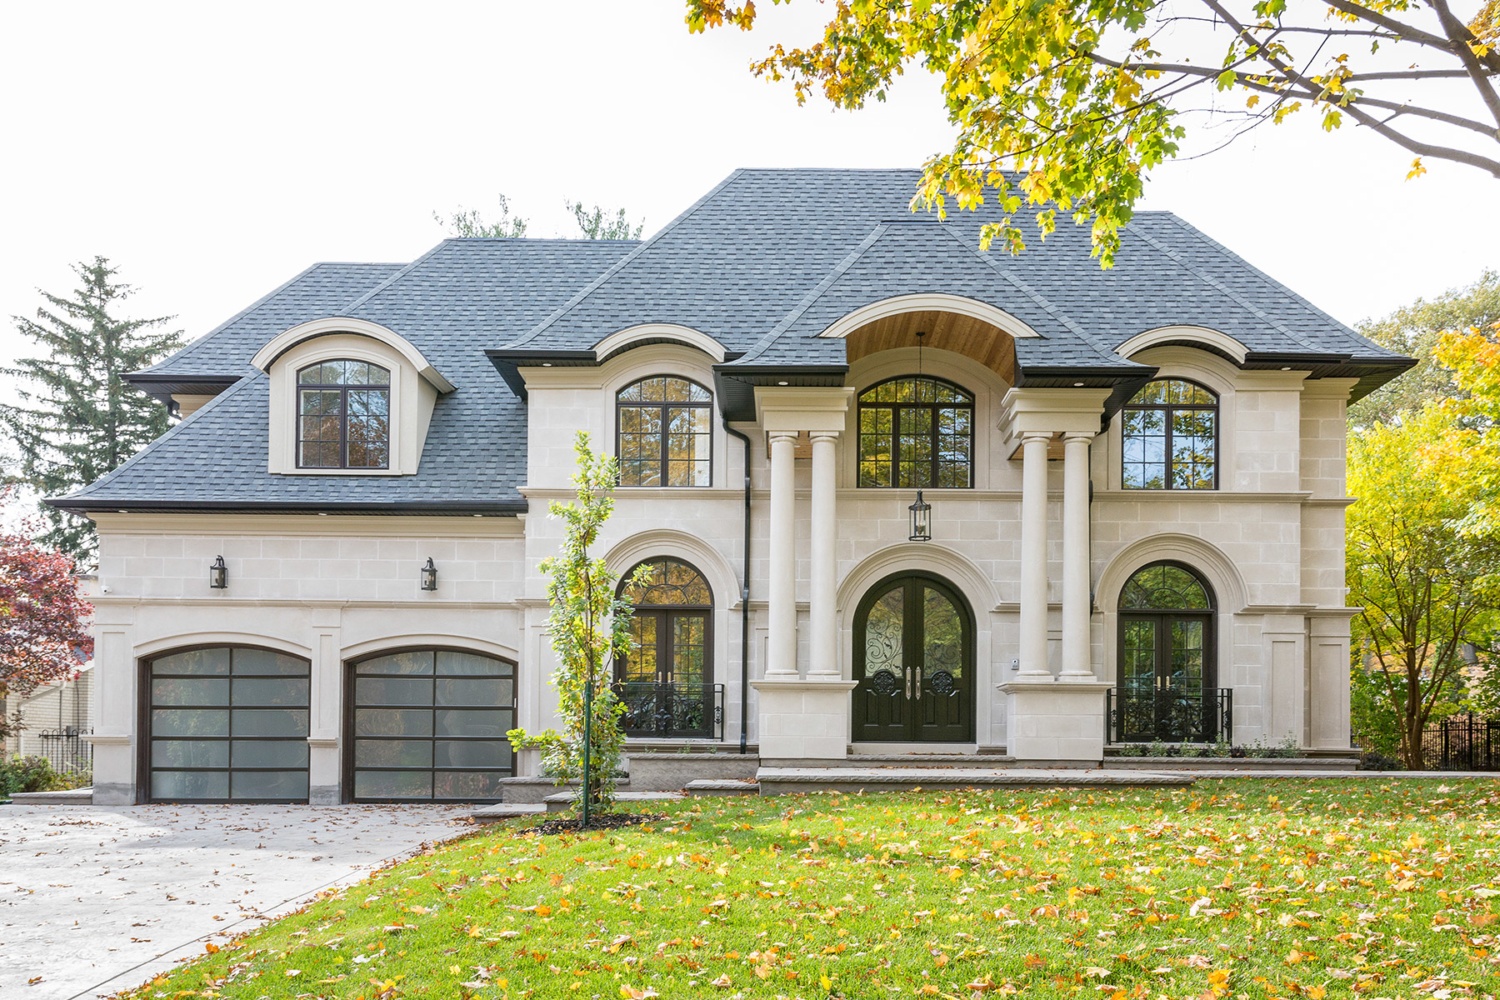 Chateau style home with black trim, light stone and glass garage door.